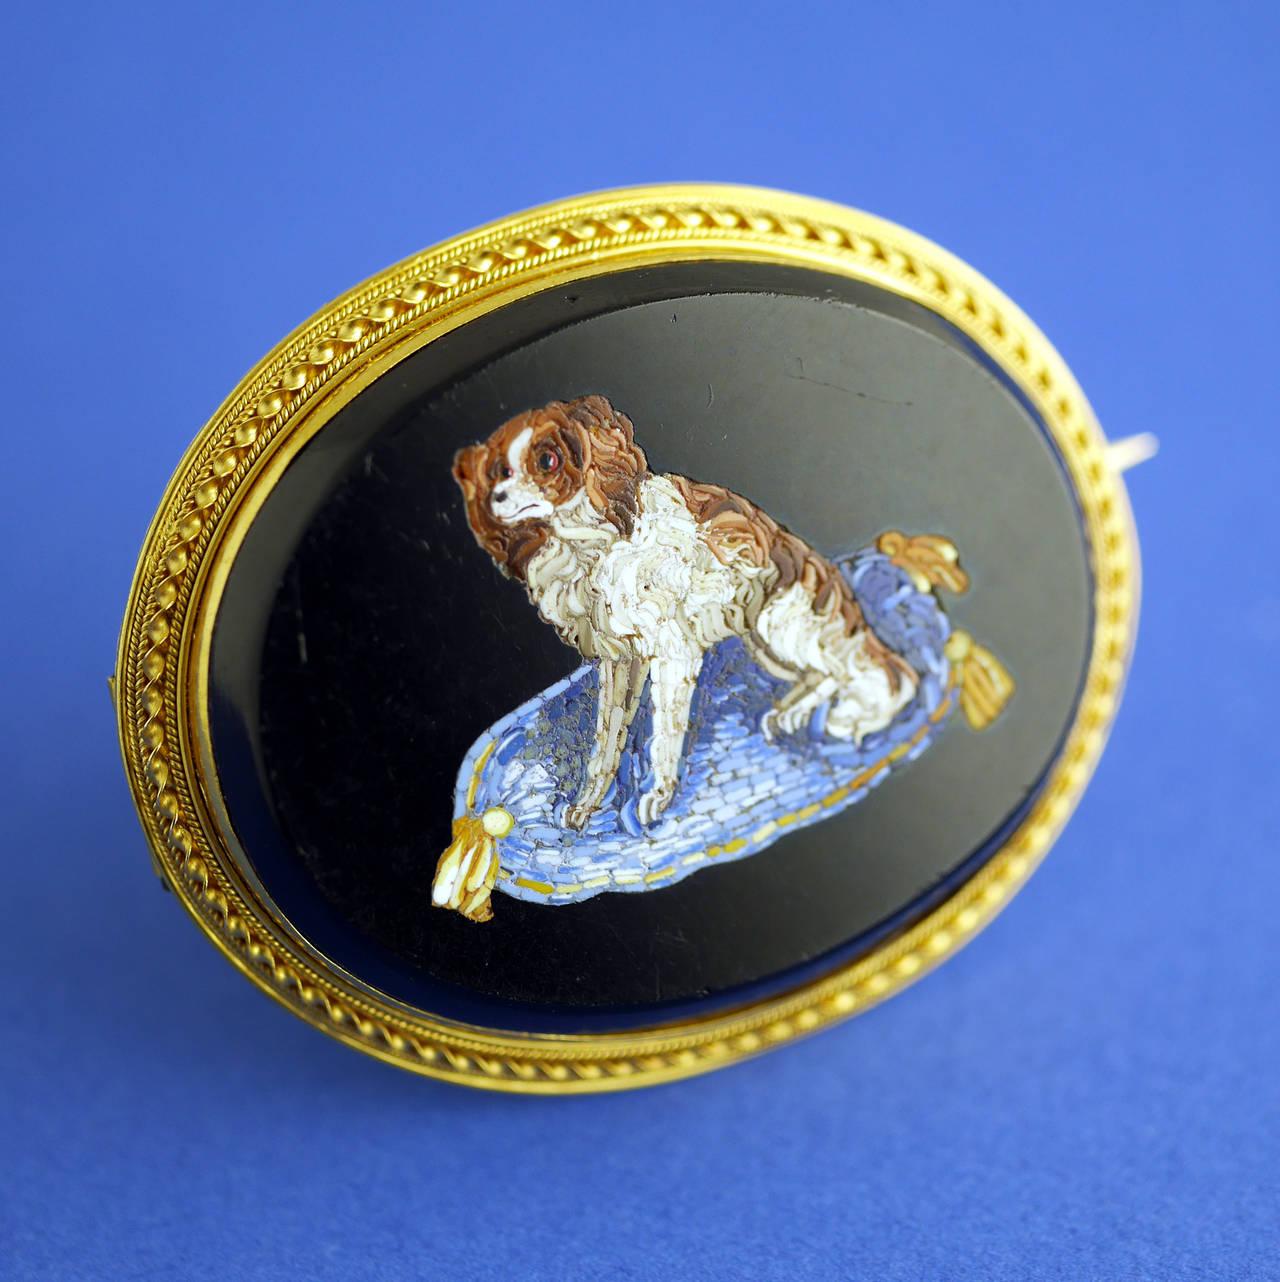 Fine quality micromosaic, depicting a King Charles Spaniel dog on his cushion, set as a brooch in 18ct gold. 

Dogs were a symbol of faithful love. The King Charles Spaniel breed was extremely popular amongst the English aristocracy, especially